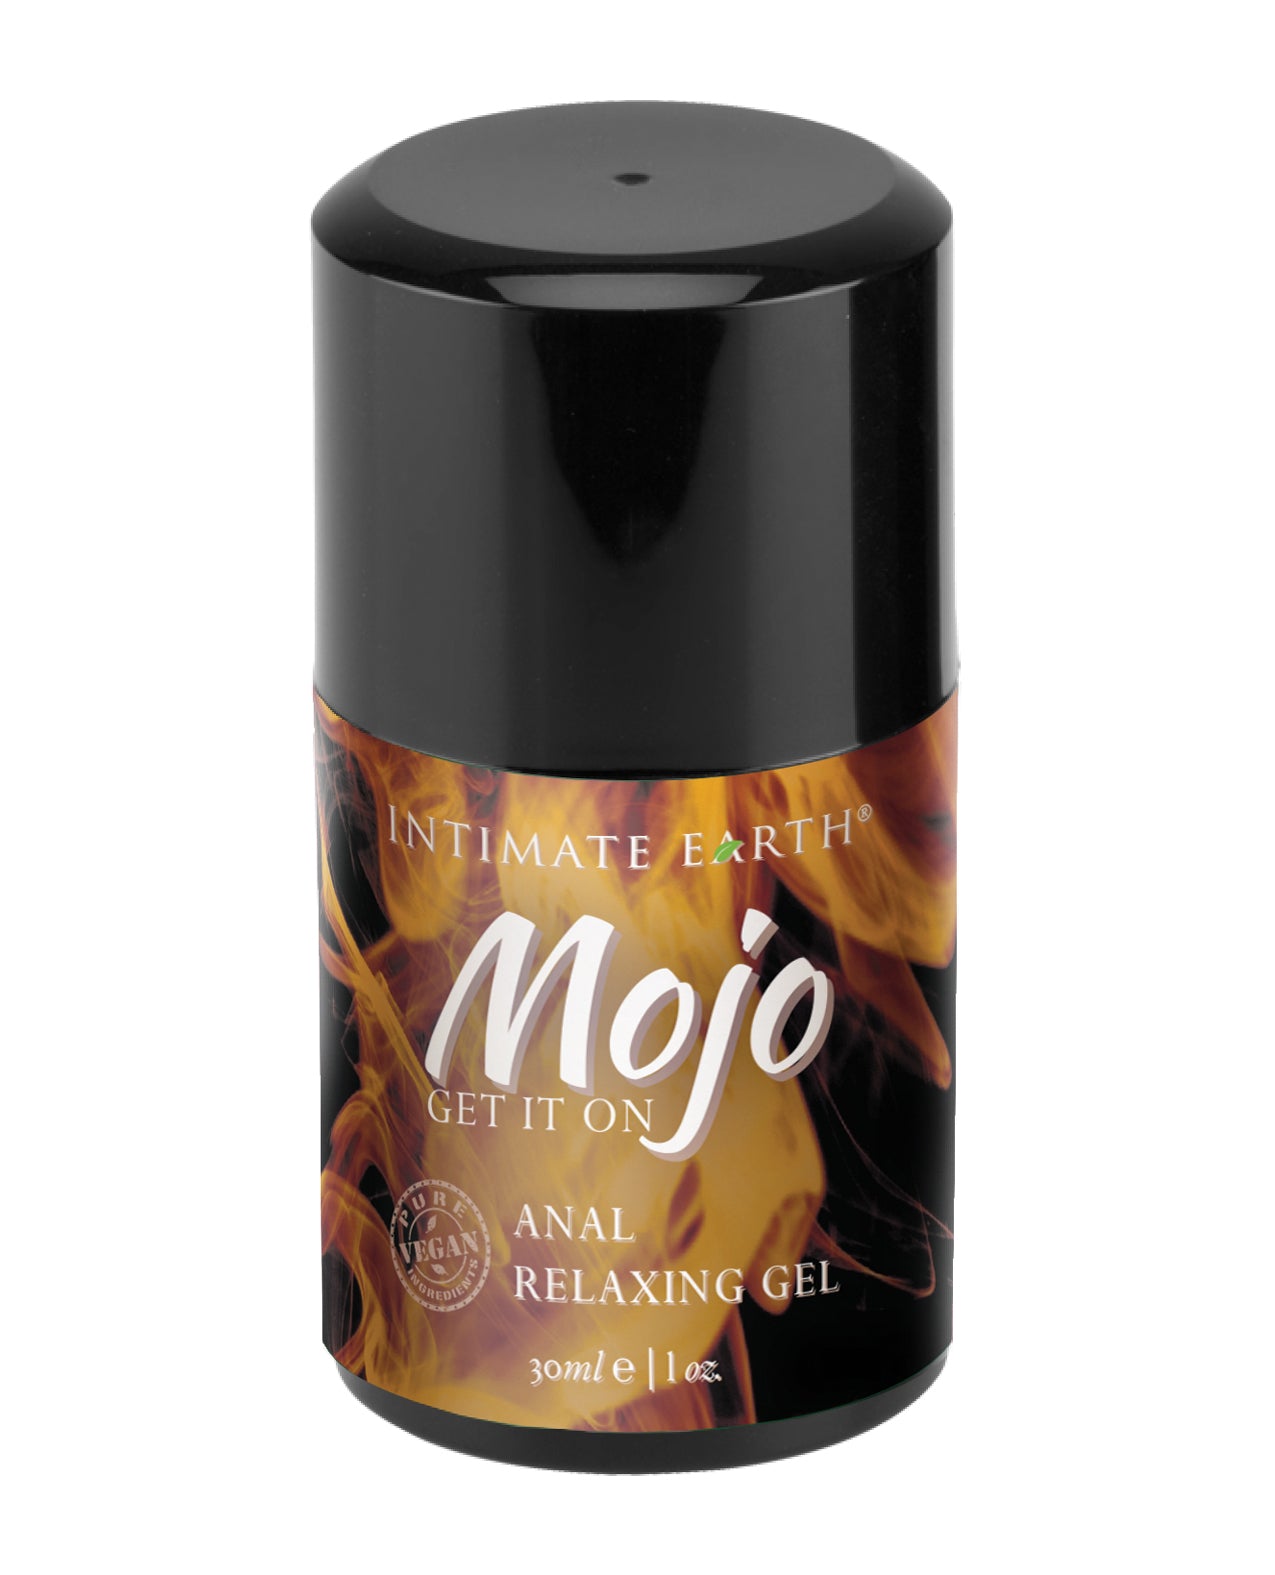 Shop for the Intimate Earth Mojo Clove Anal Relaxing Gel - 1 oz at My Ruby Lips